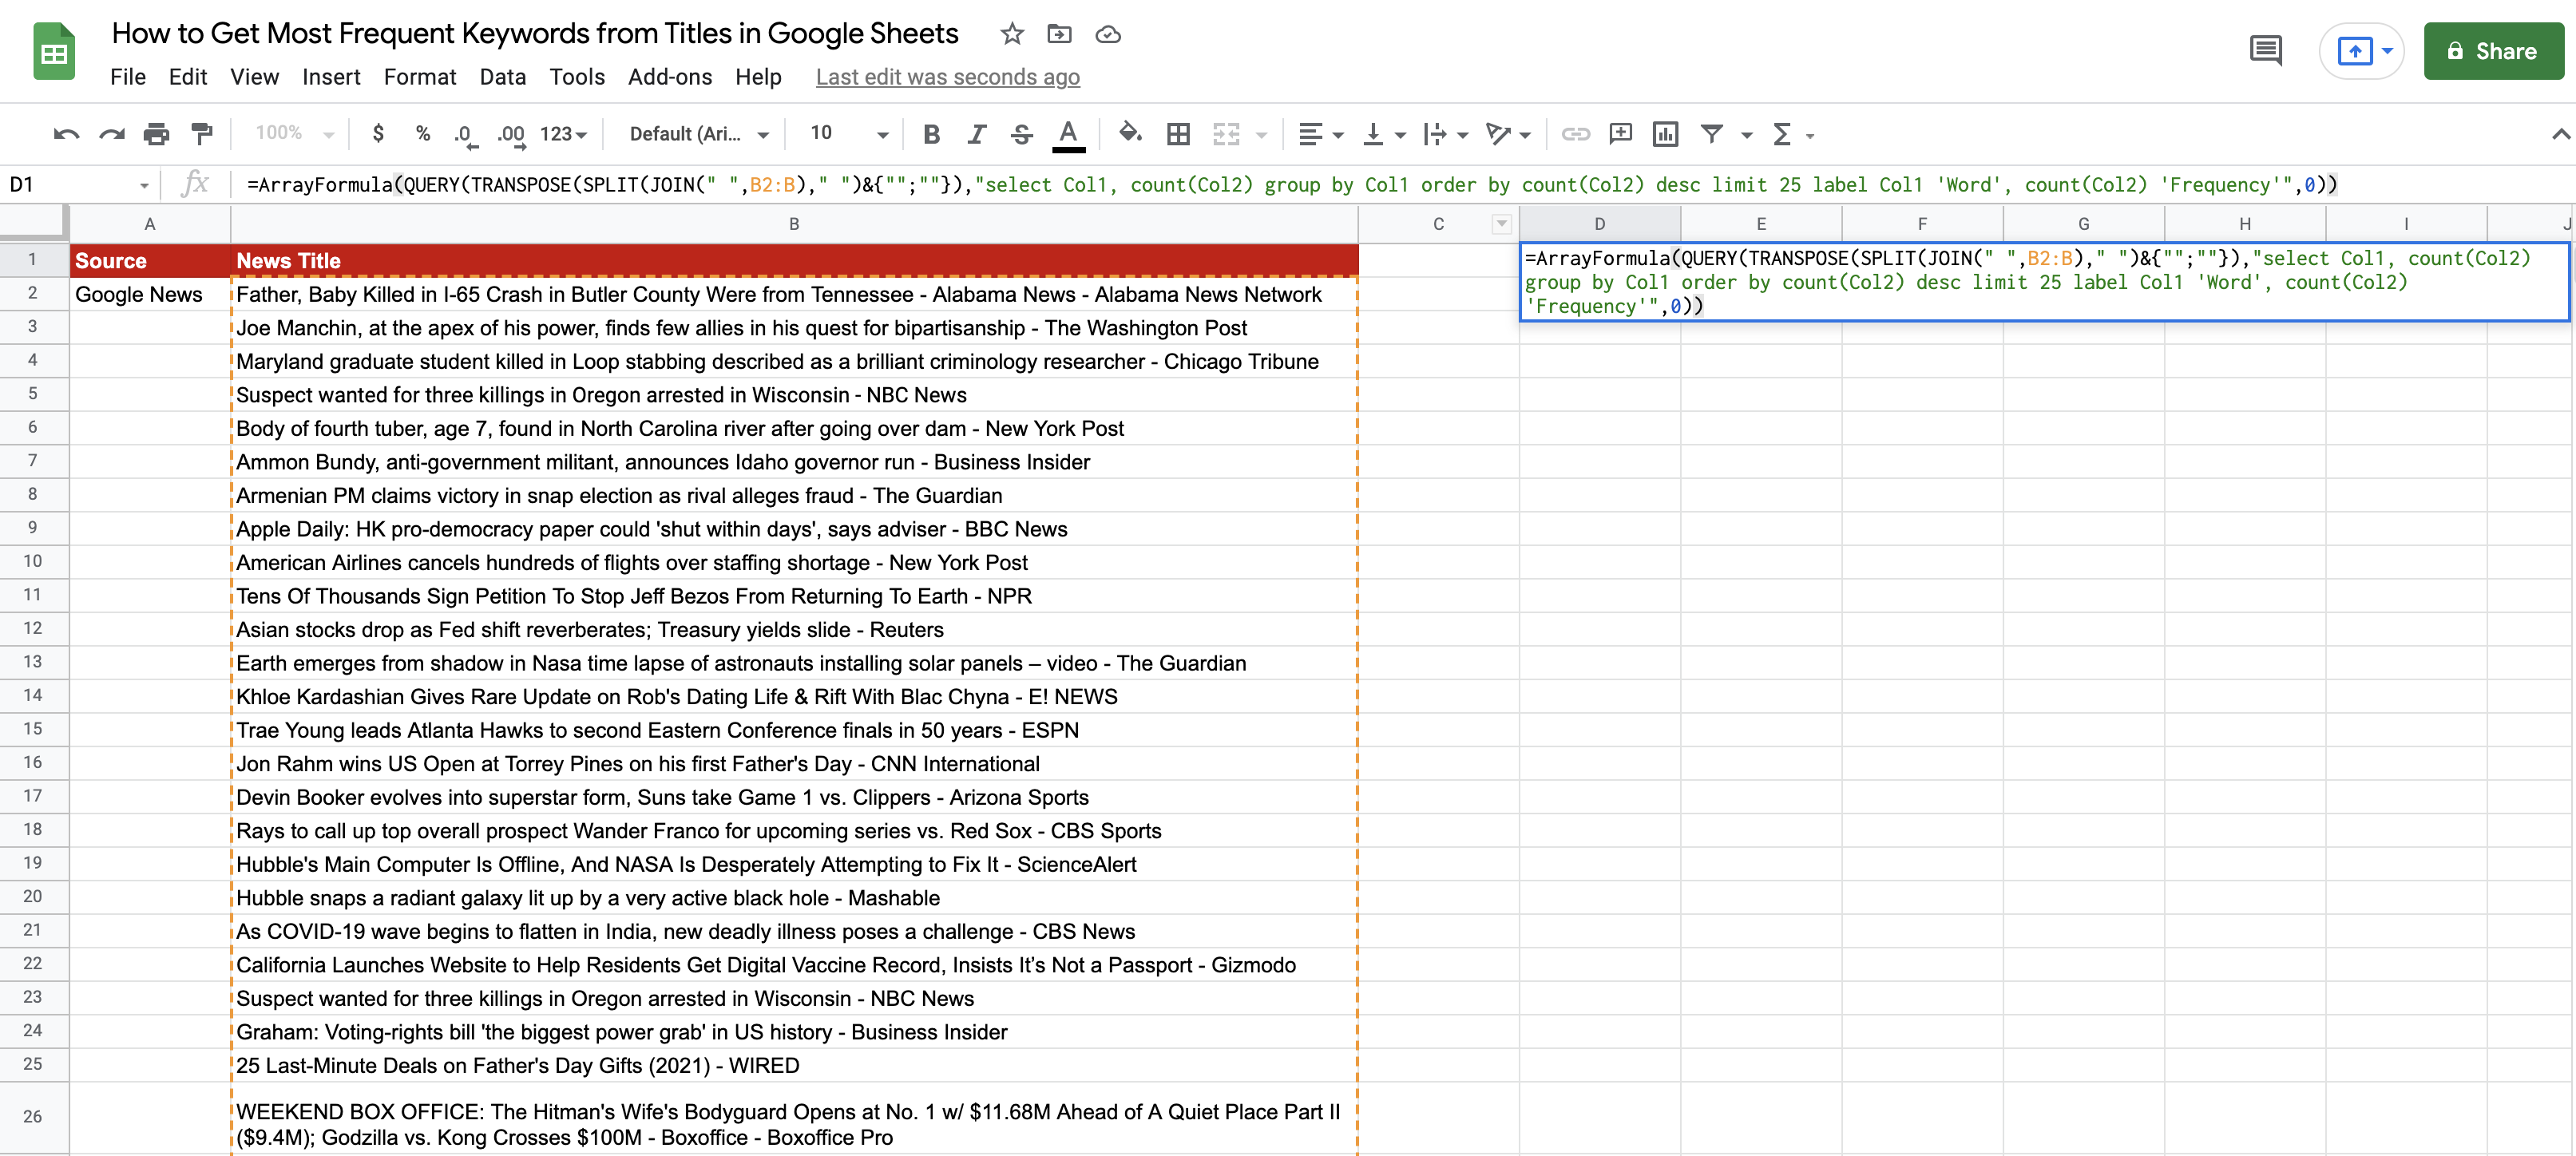 Frequent keywords in Google Sheets